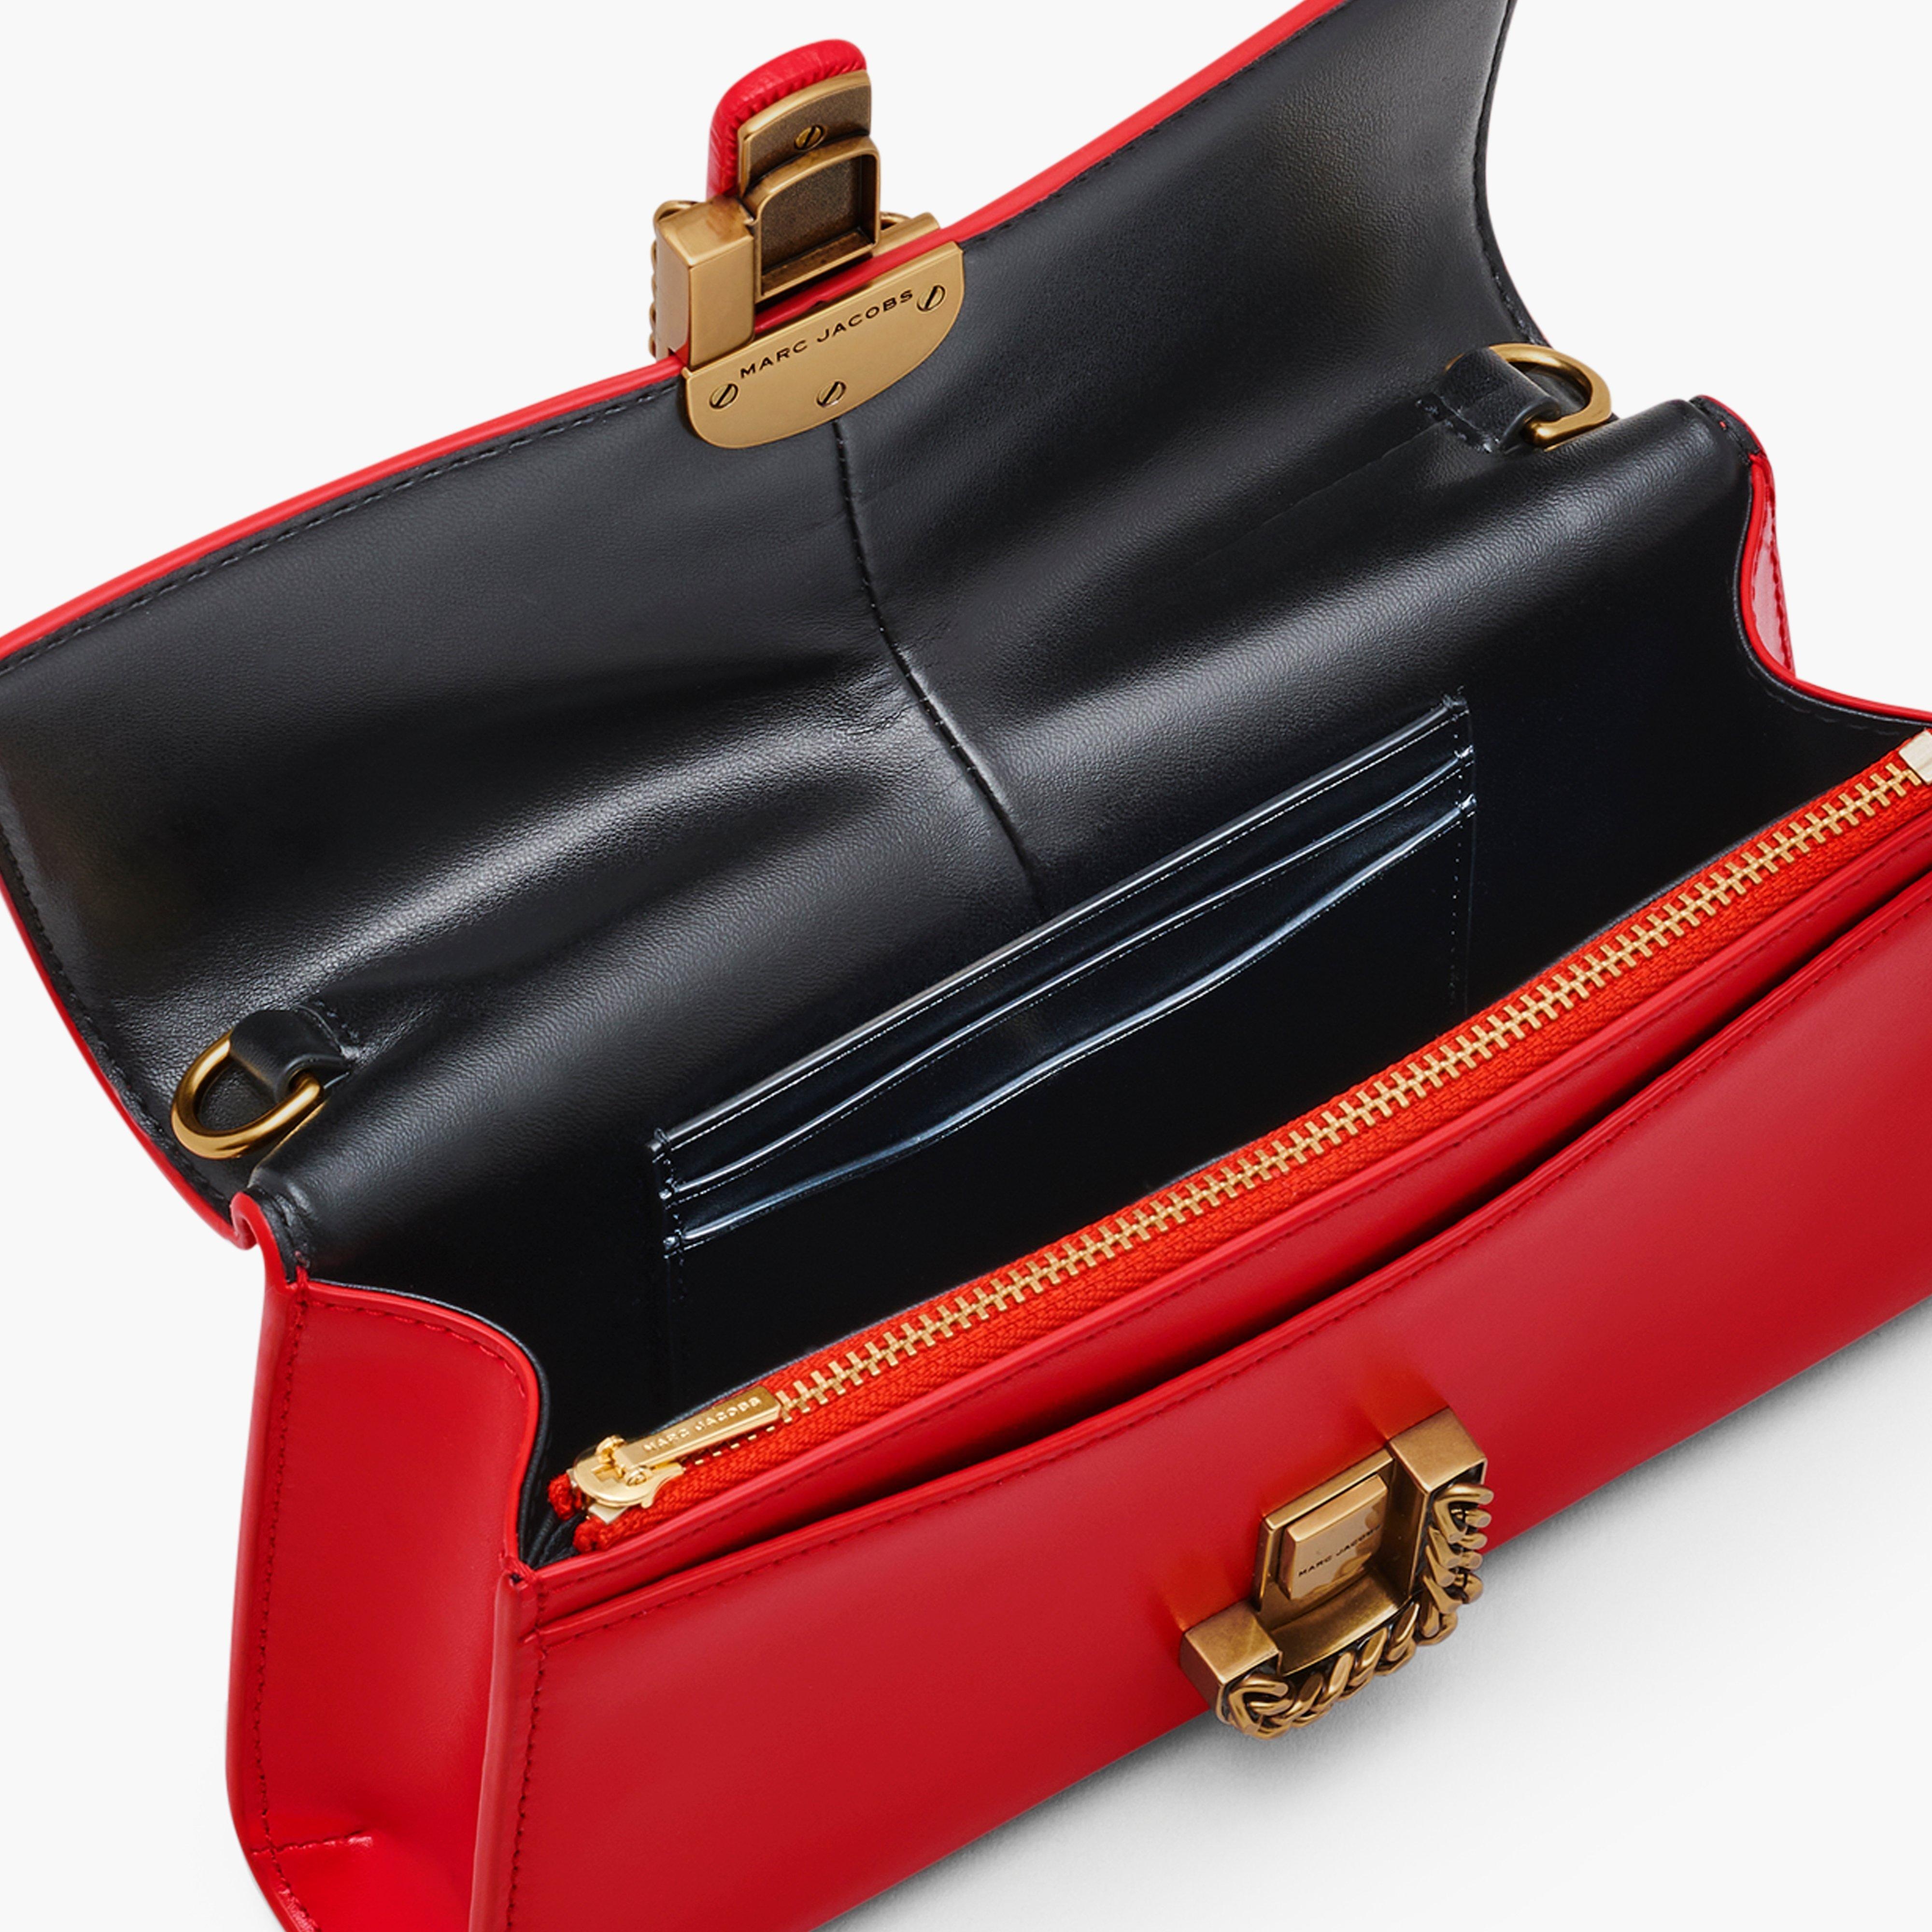 Marc Jacobs Red 'The Colorblock Snapshot' Bag